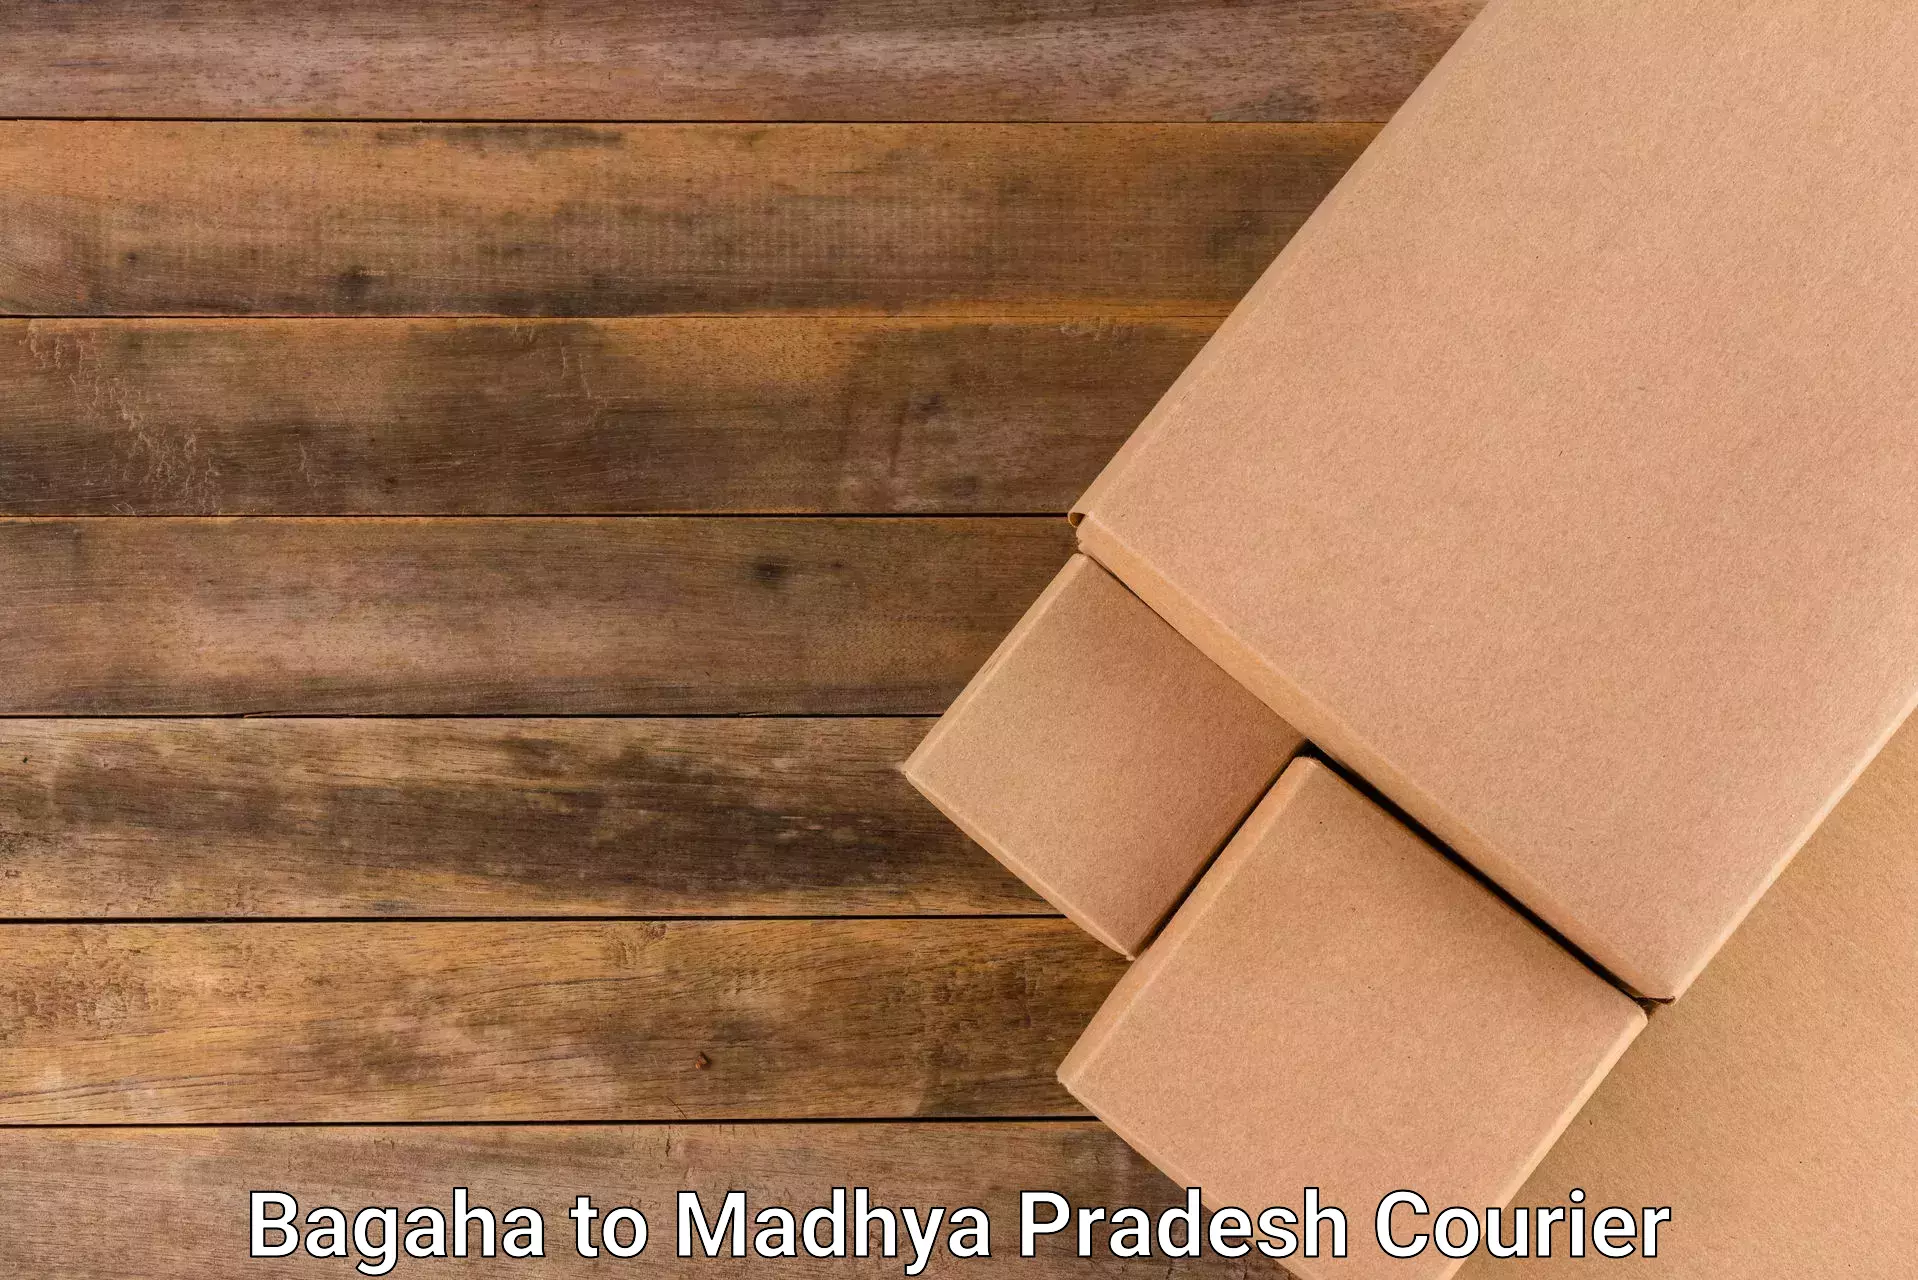 Courier service efficiency Bagaha to Chanderi